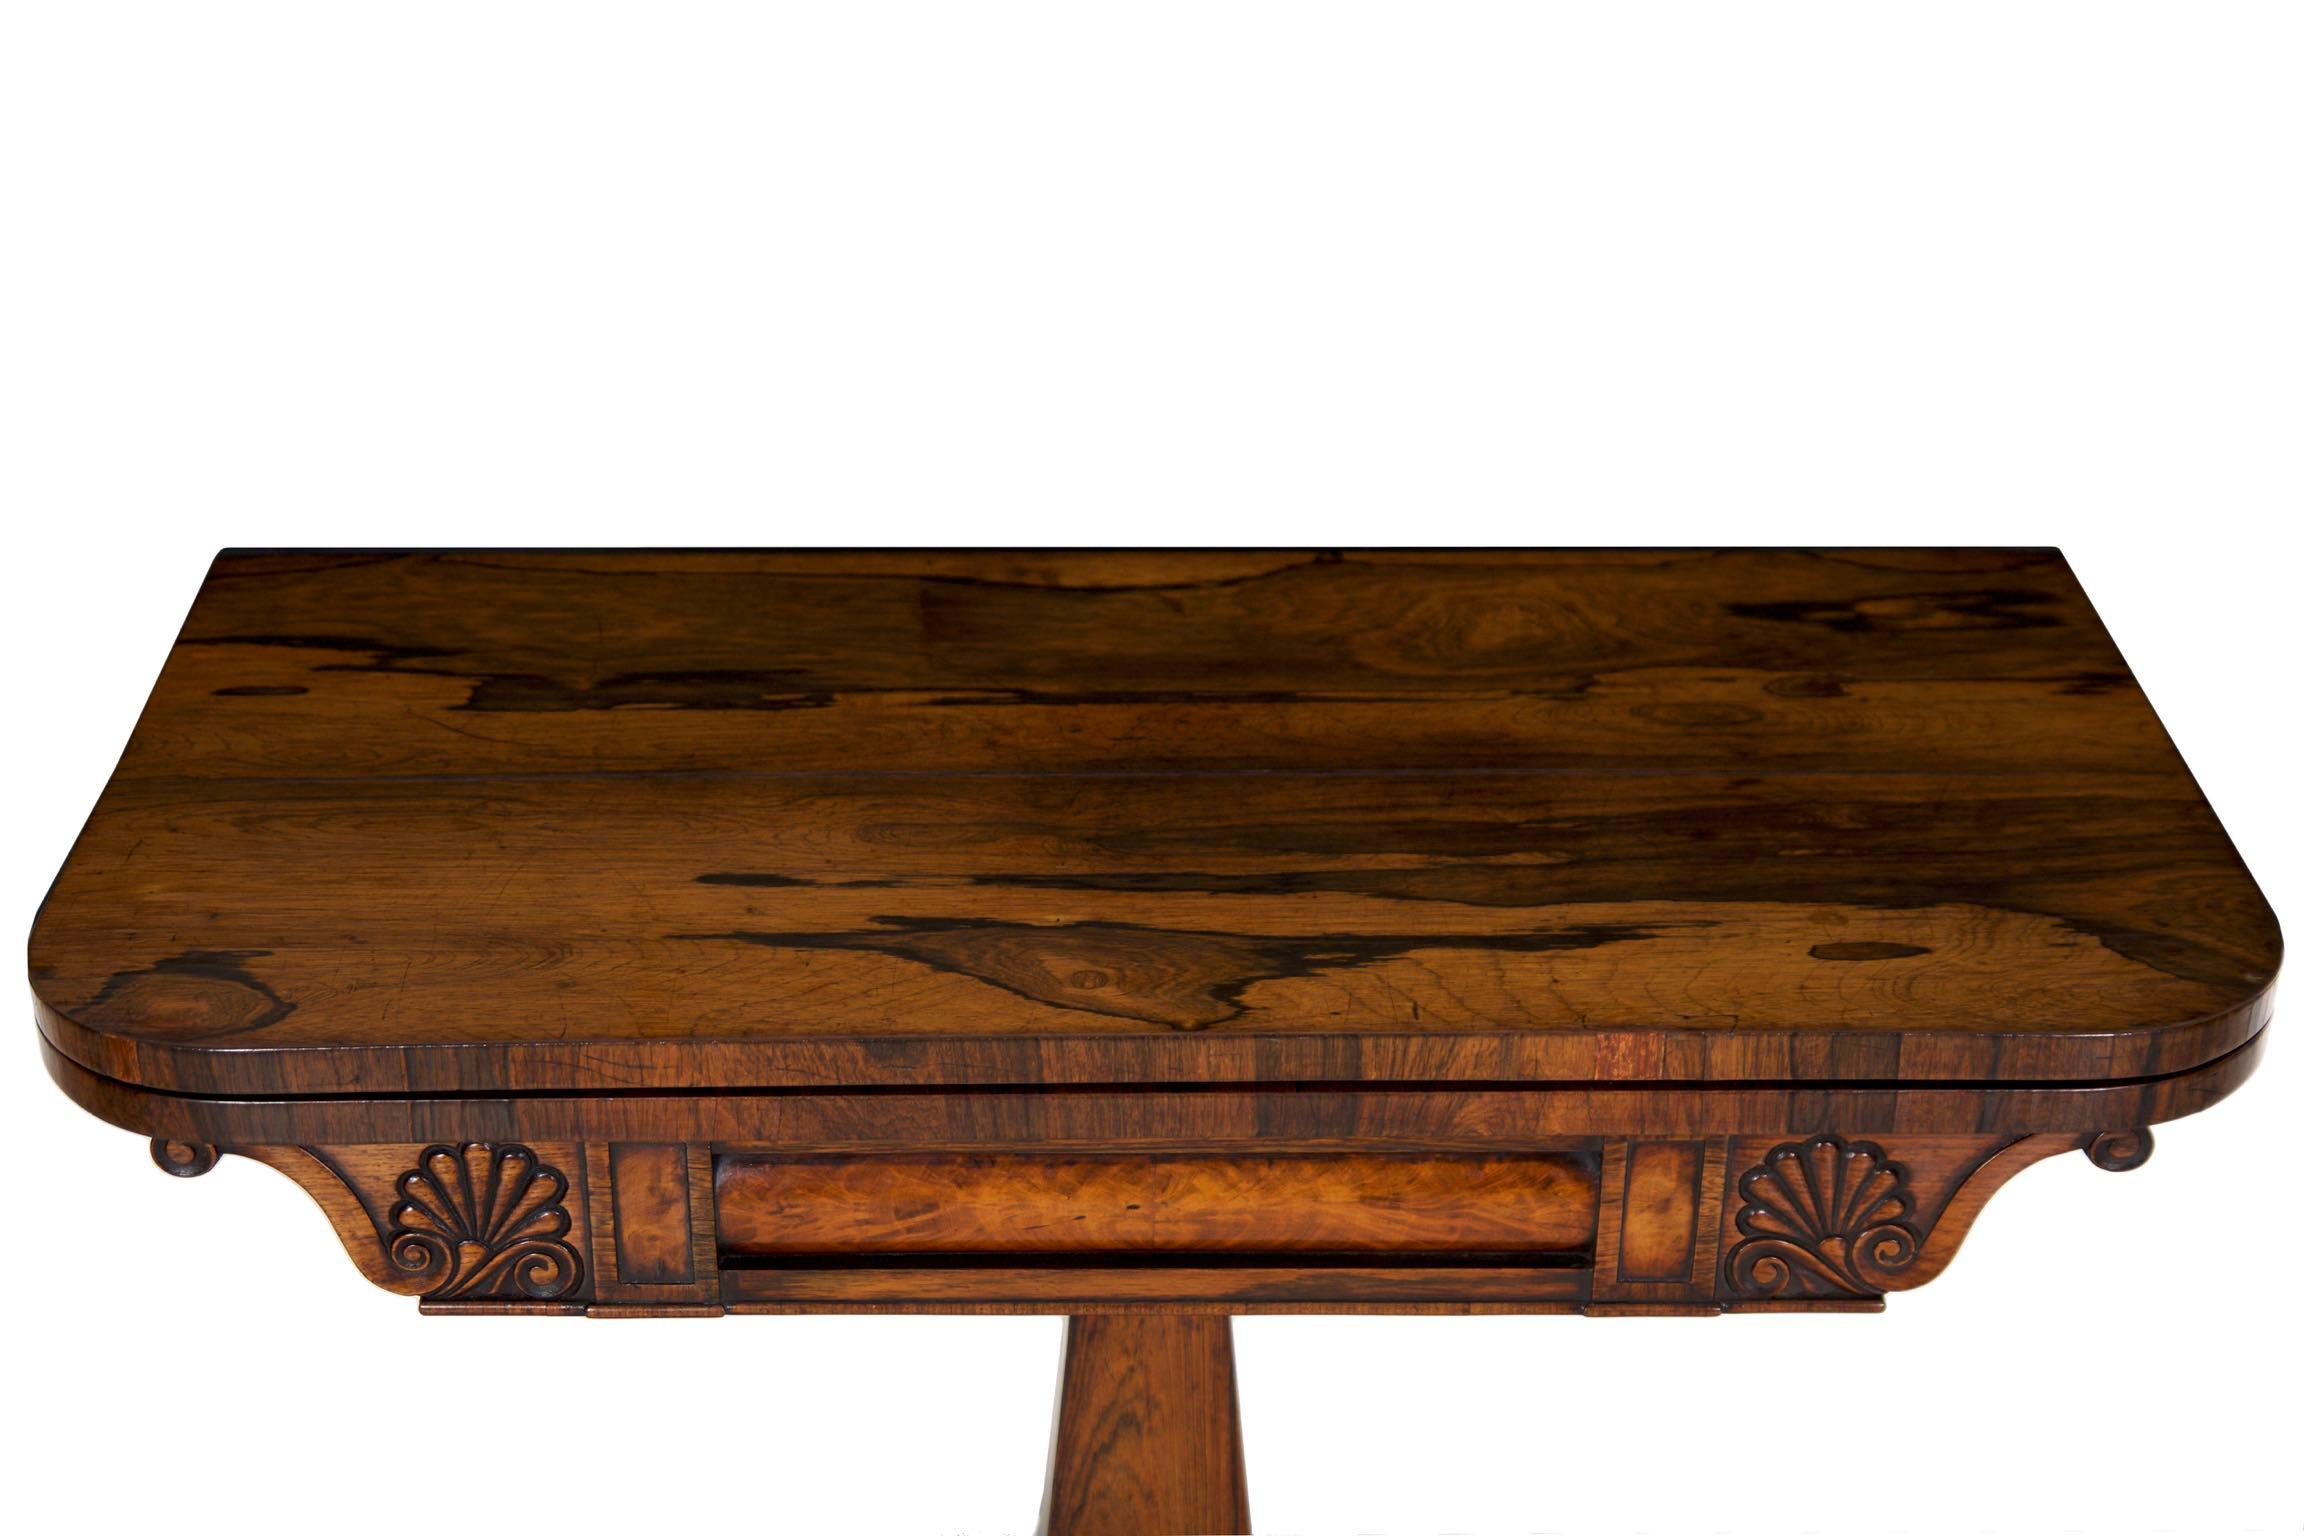 19th Century English Regency Antique Rosewood Carved Game Card Table, circa 1825